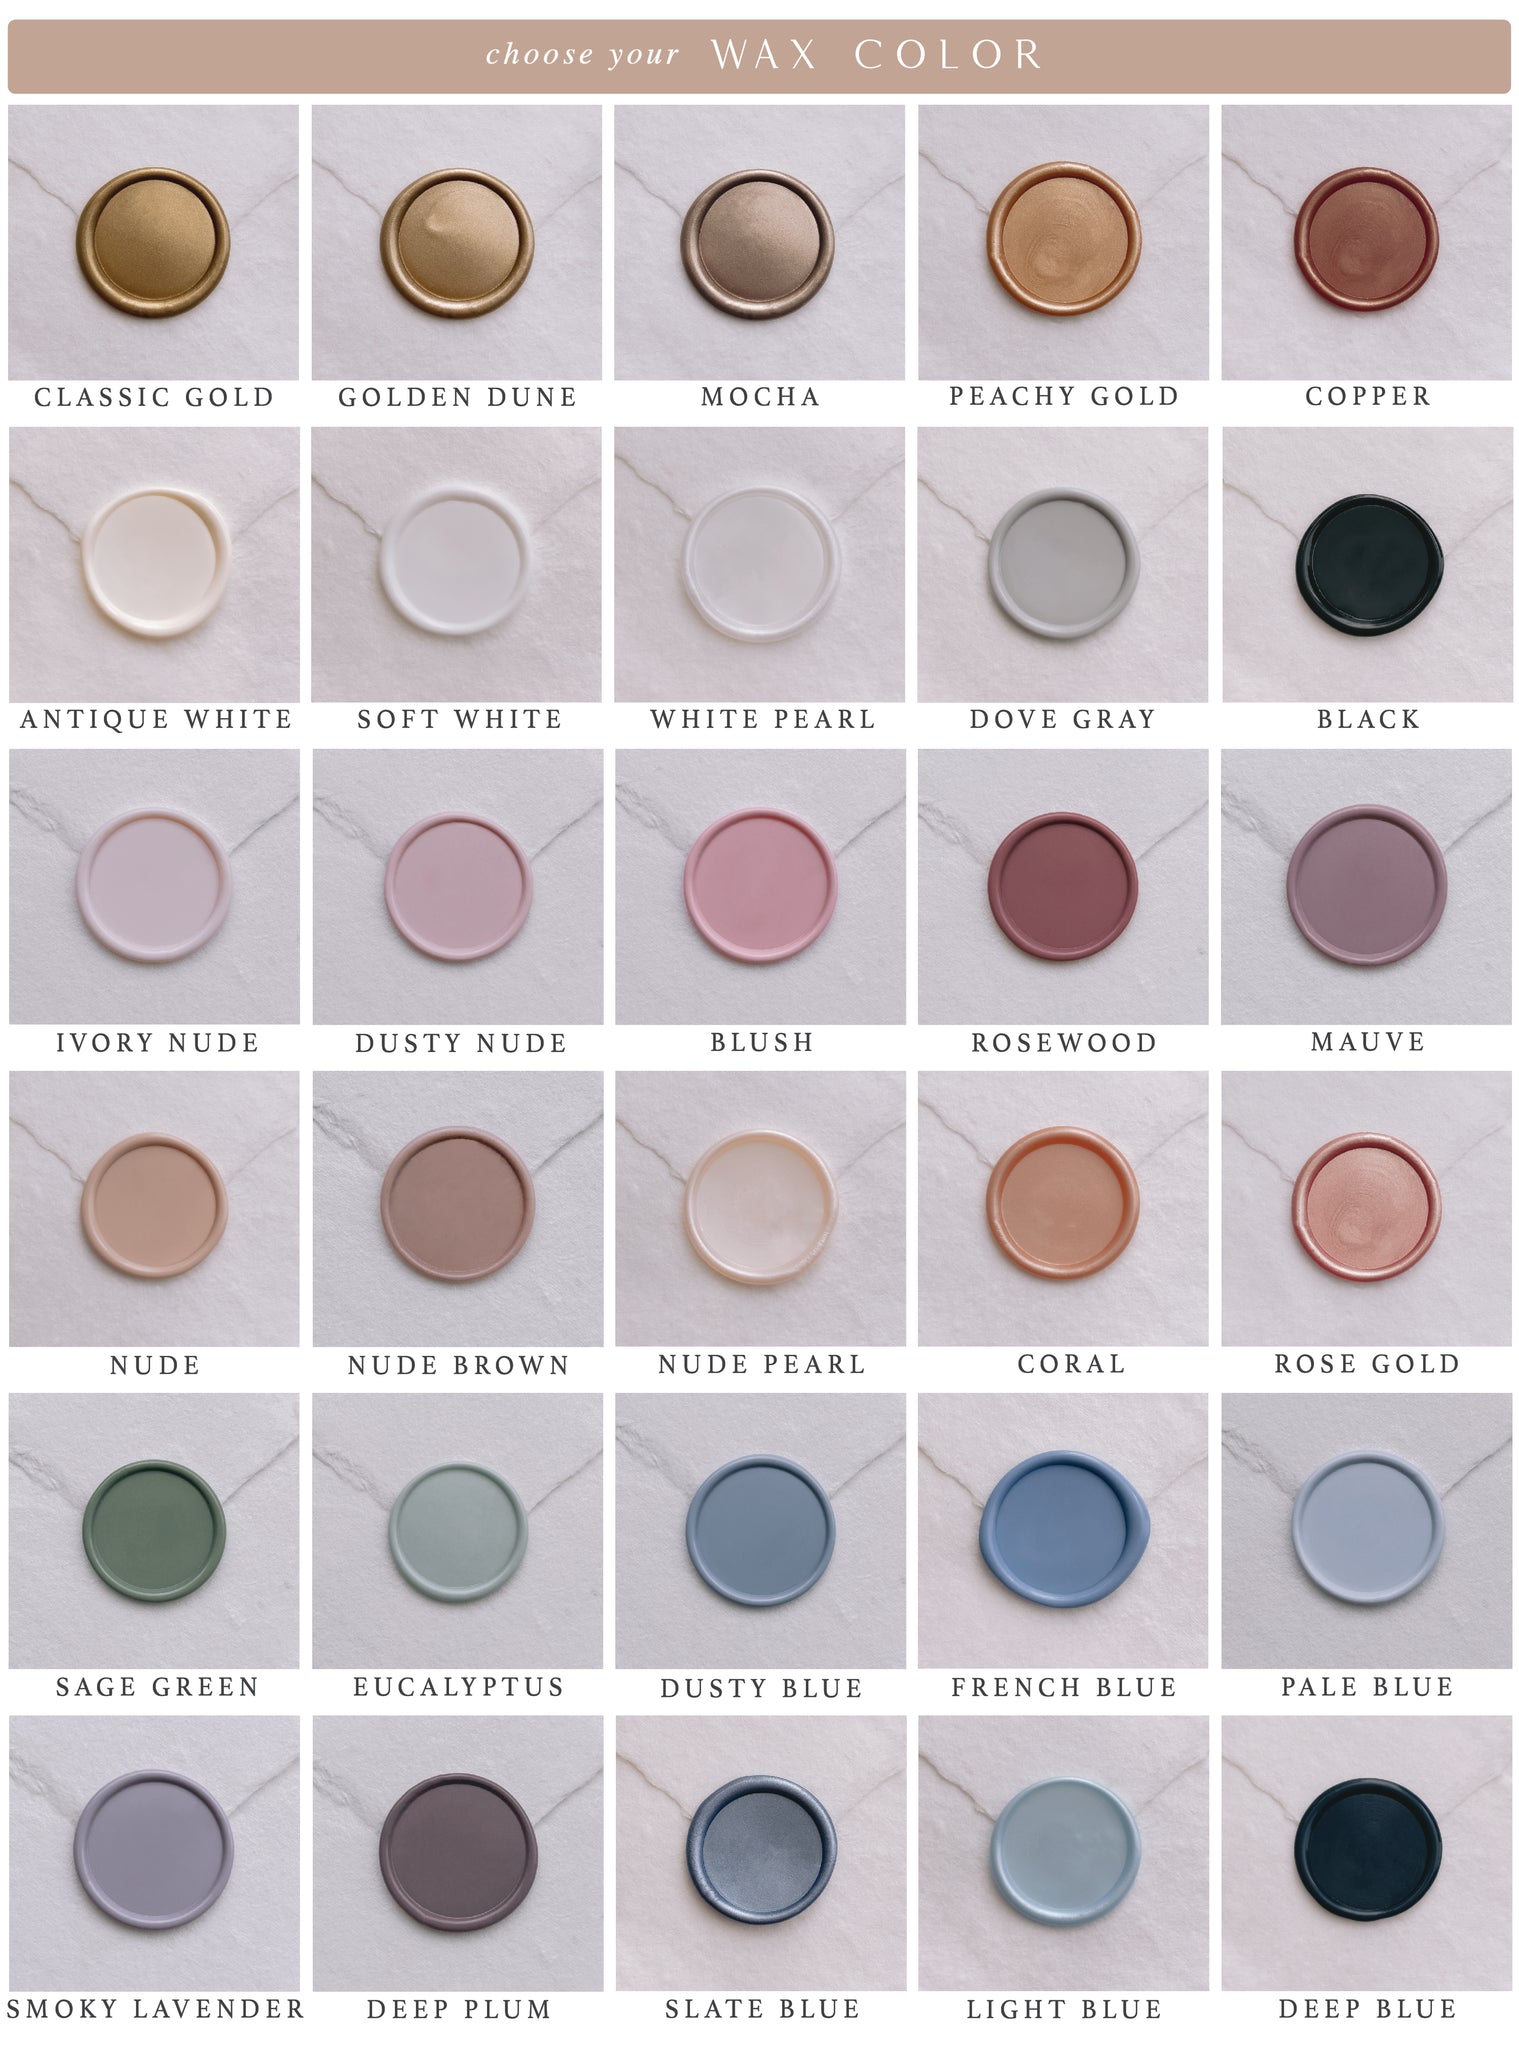 Wax seal color swatch samples in 30 color options